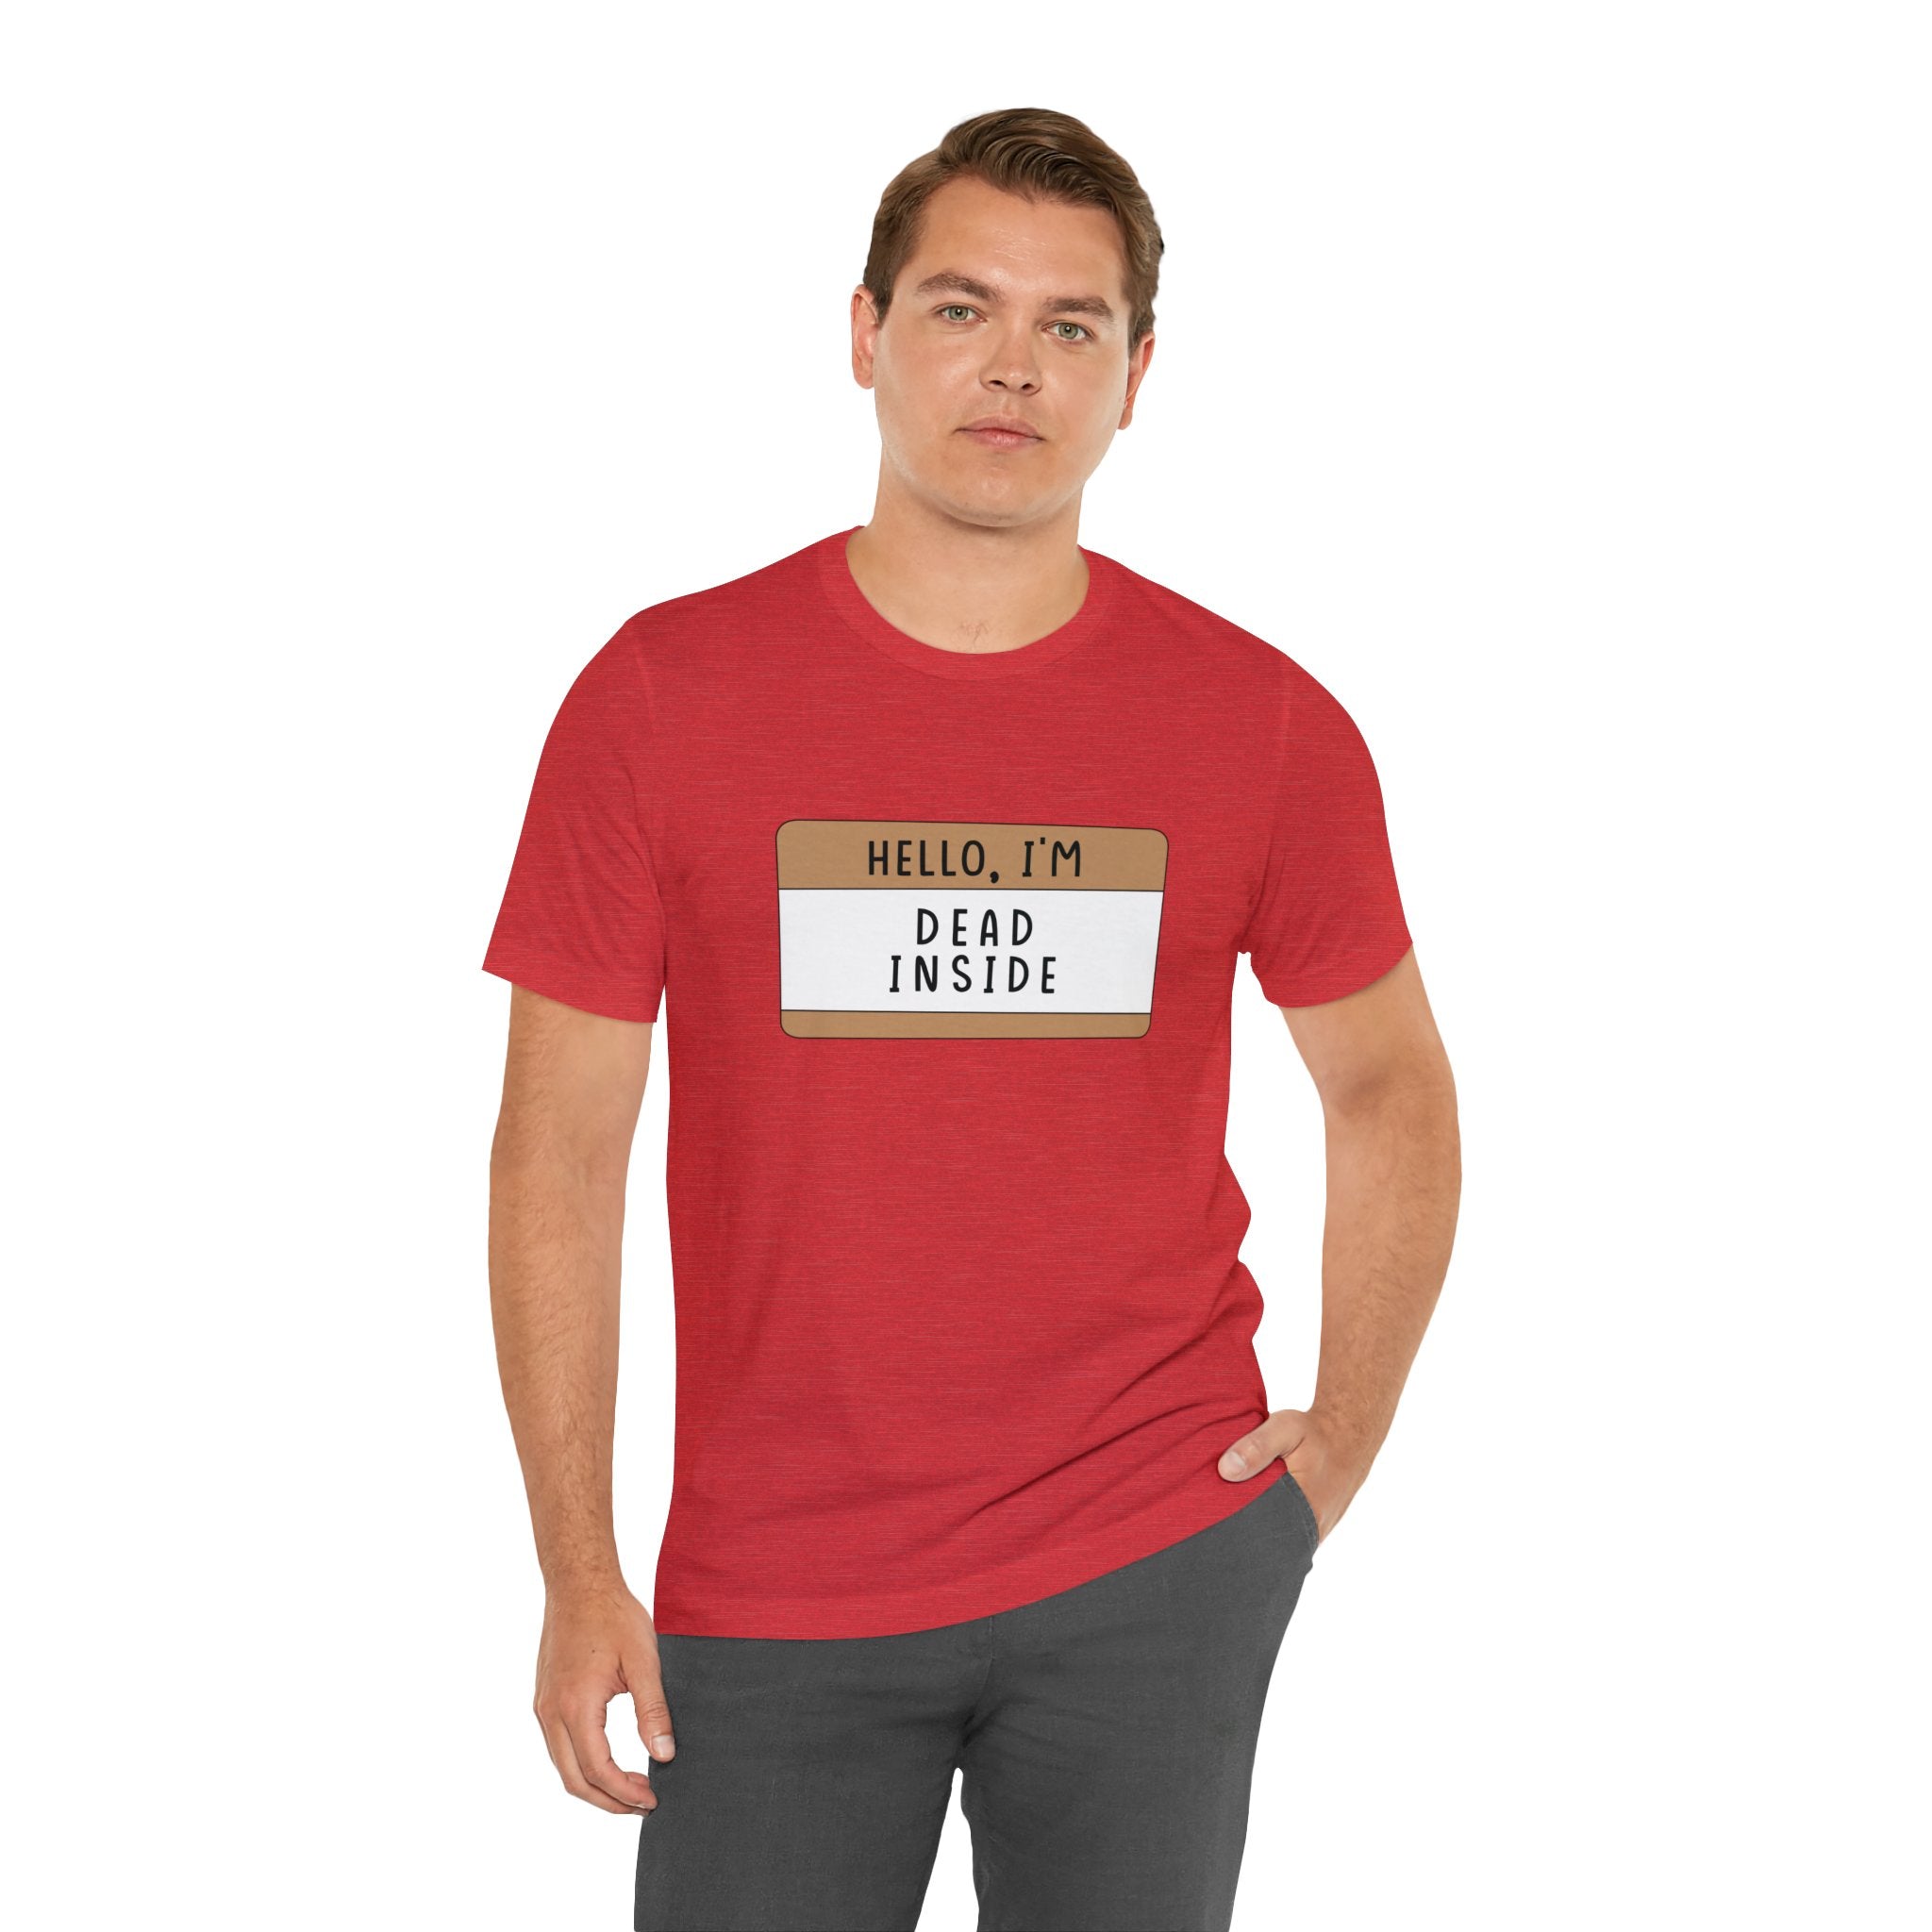 Man in a red "Hello, I'm Dead Inside" t-shirt, standing against a white background.